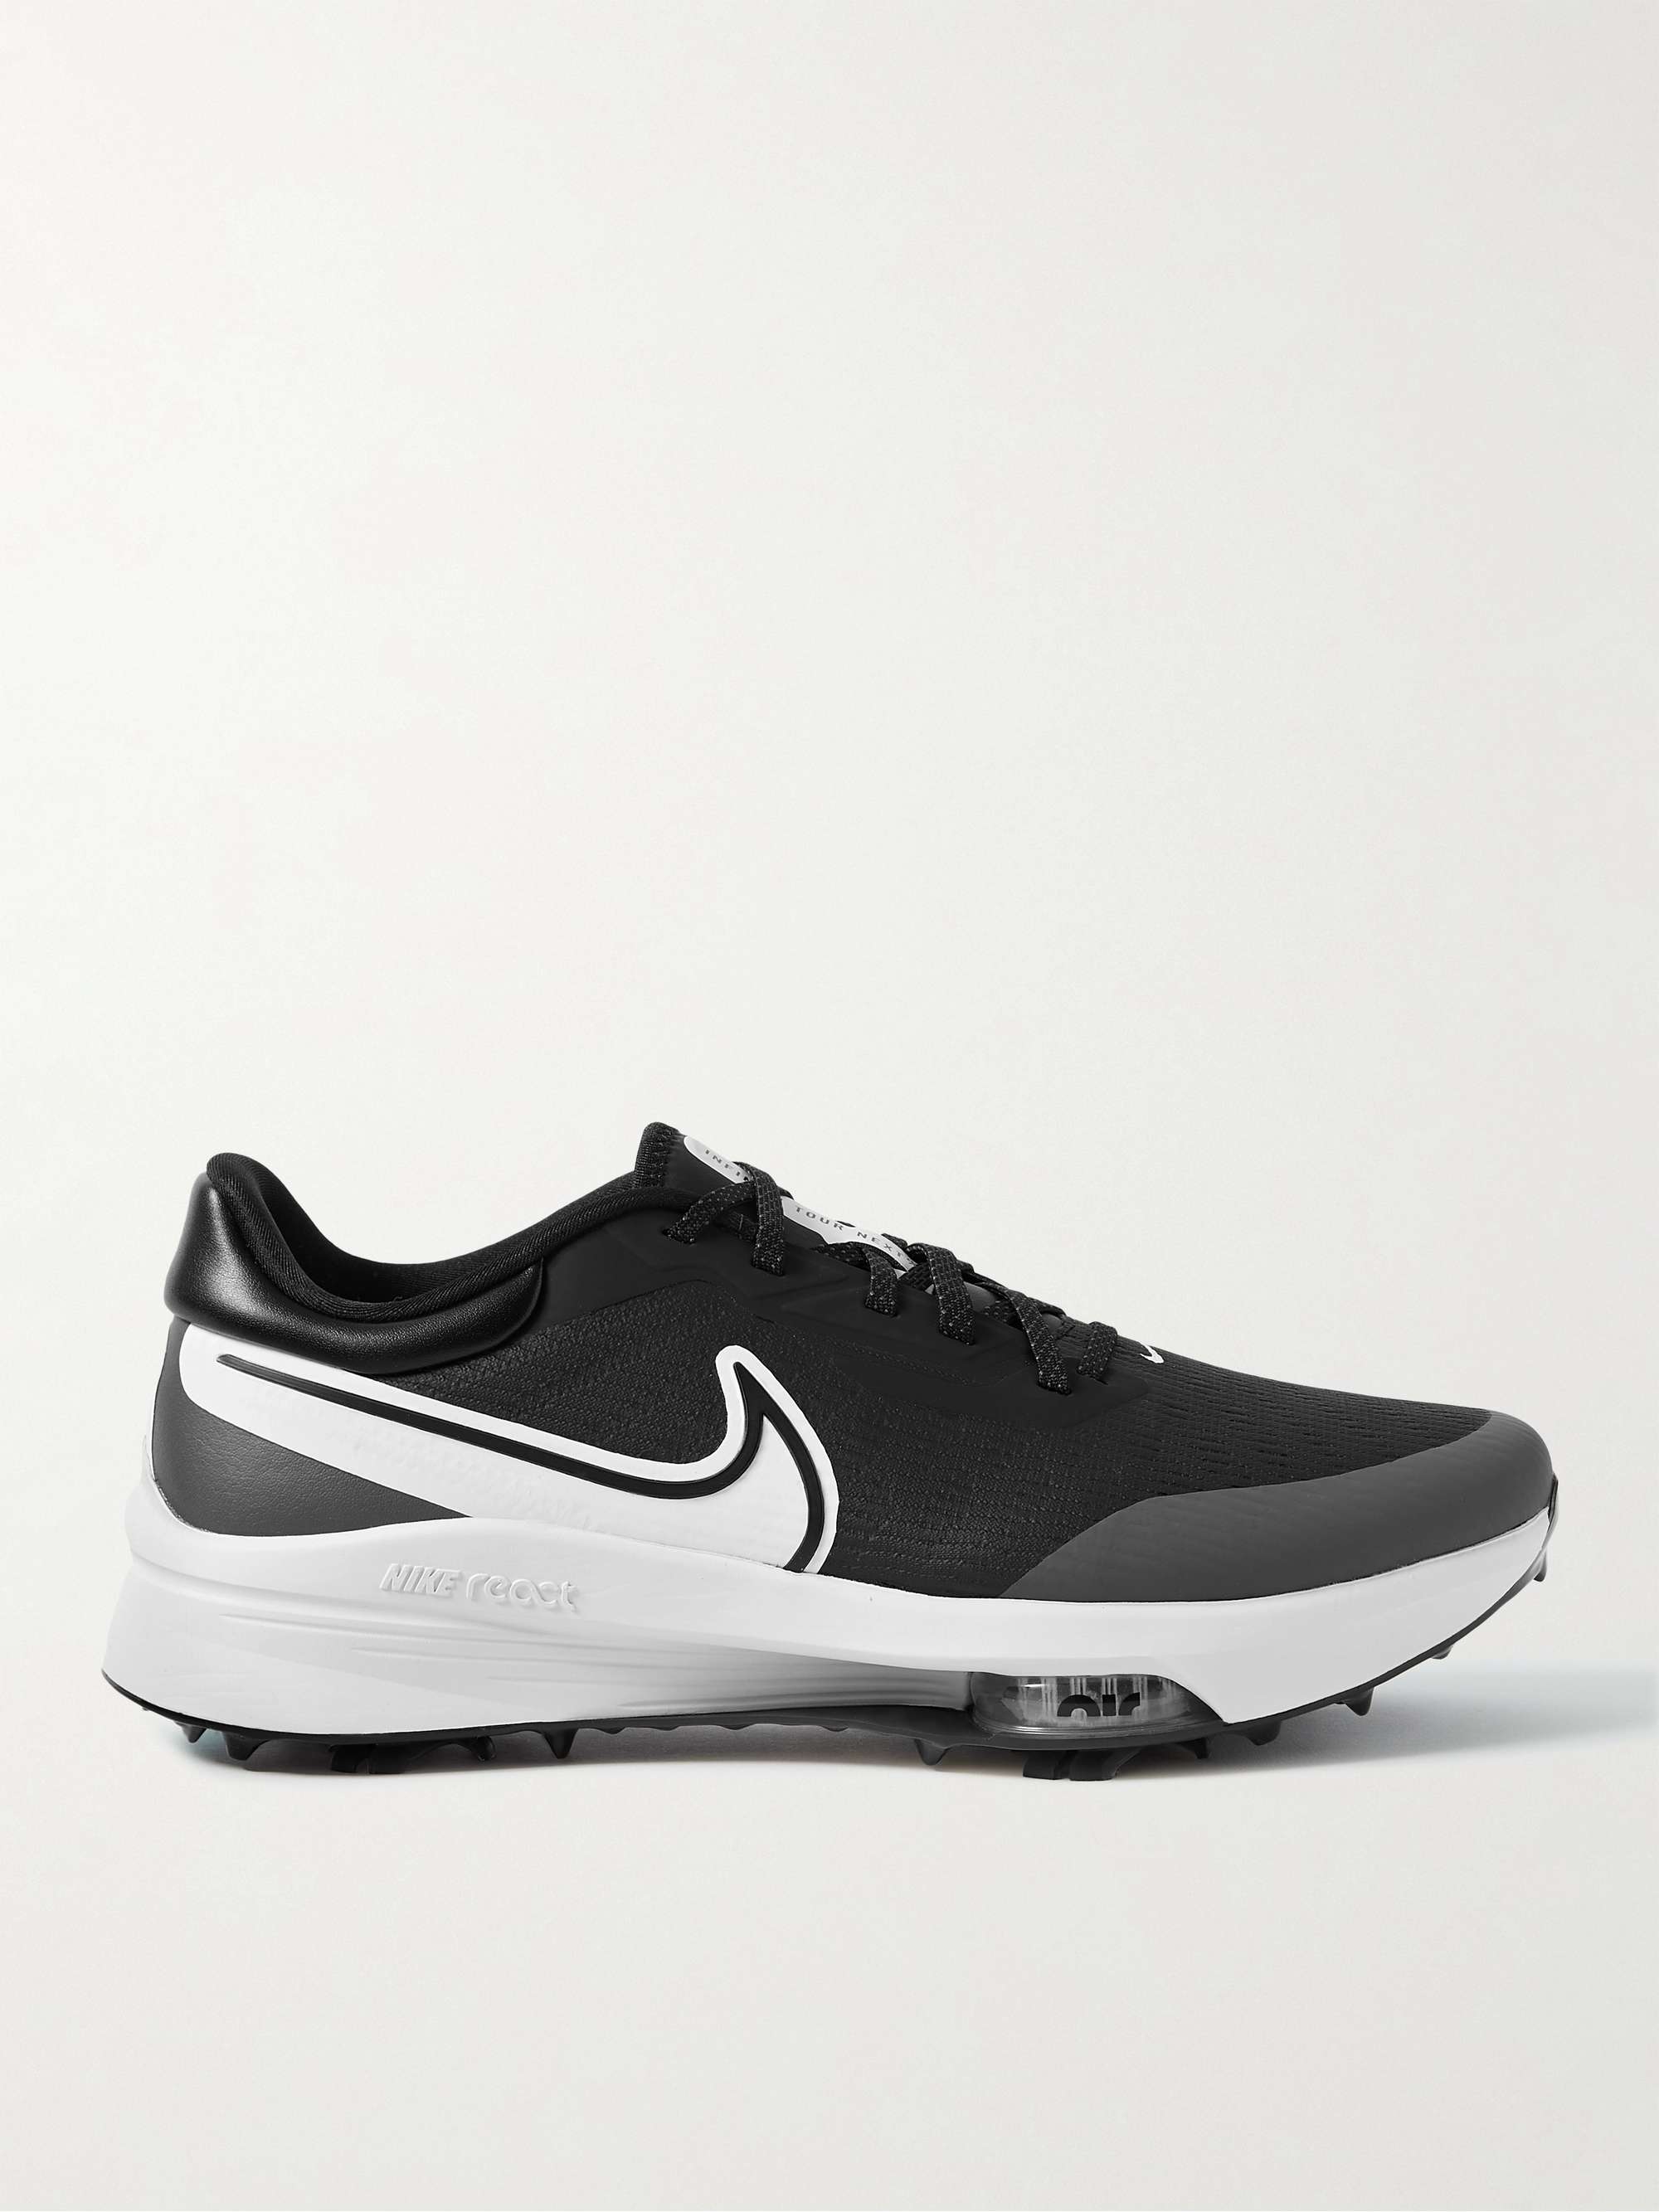 NIKE GOLF Air Zoom Infinity Tour Rubber-Trimmed Flyknit | MR PORTER